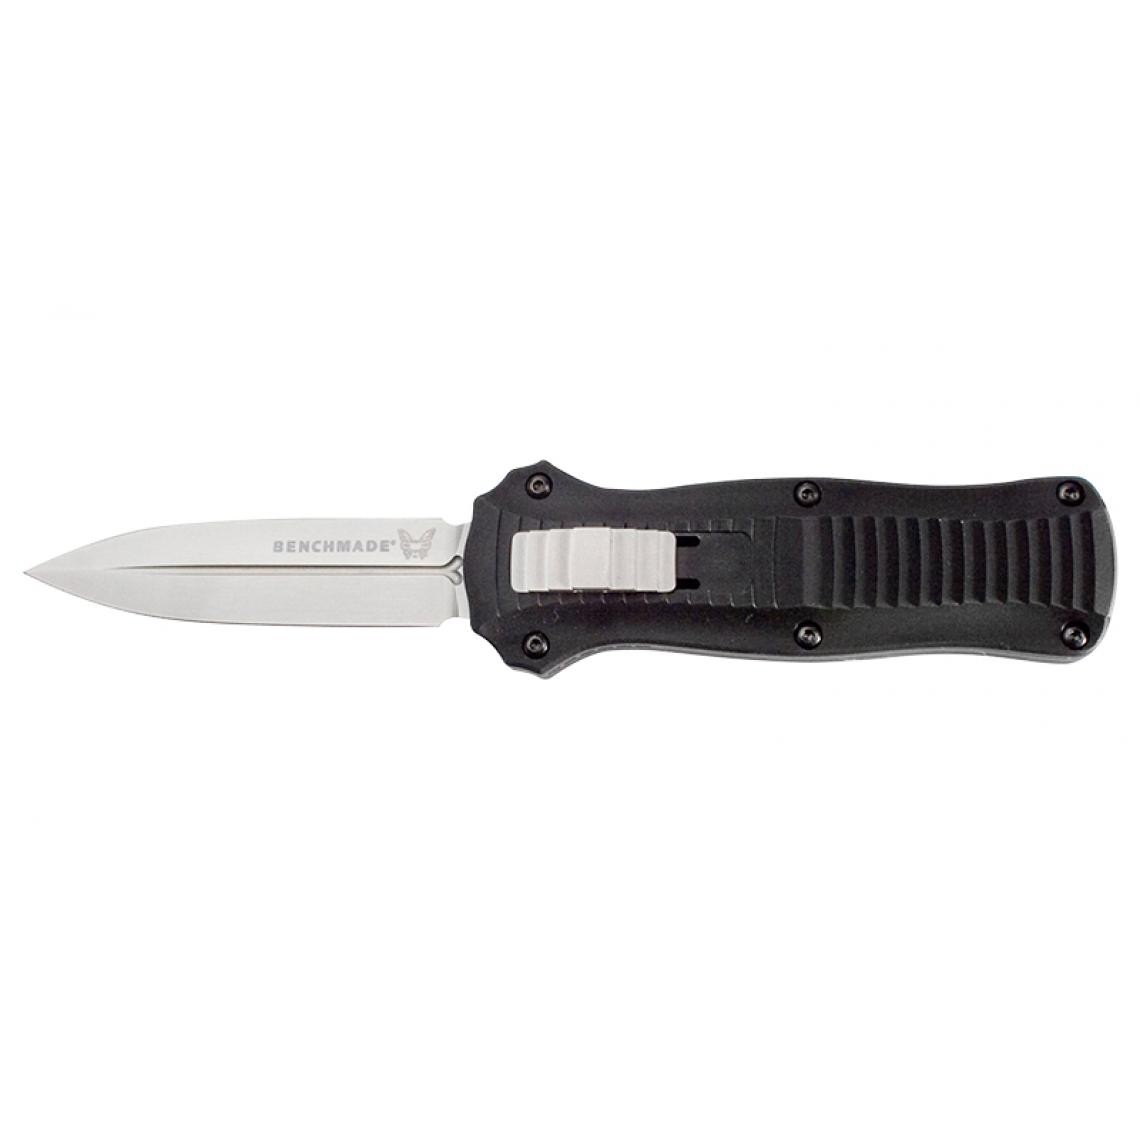 Divers Marques - BENCHMADE - BN3350 - BENCHMADE - MINI INFIDEL - Outils de coupe